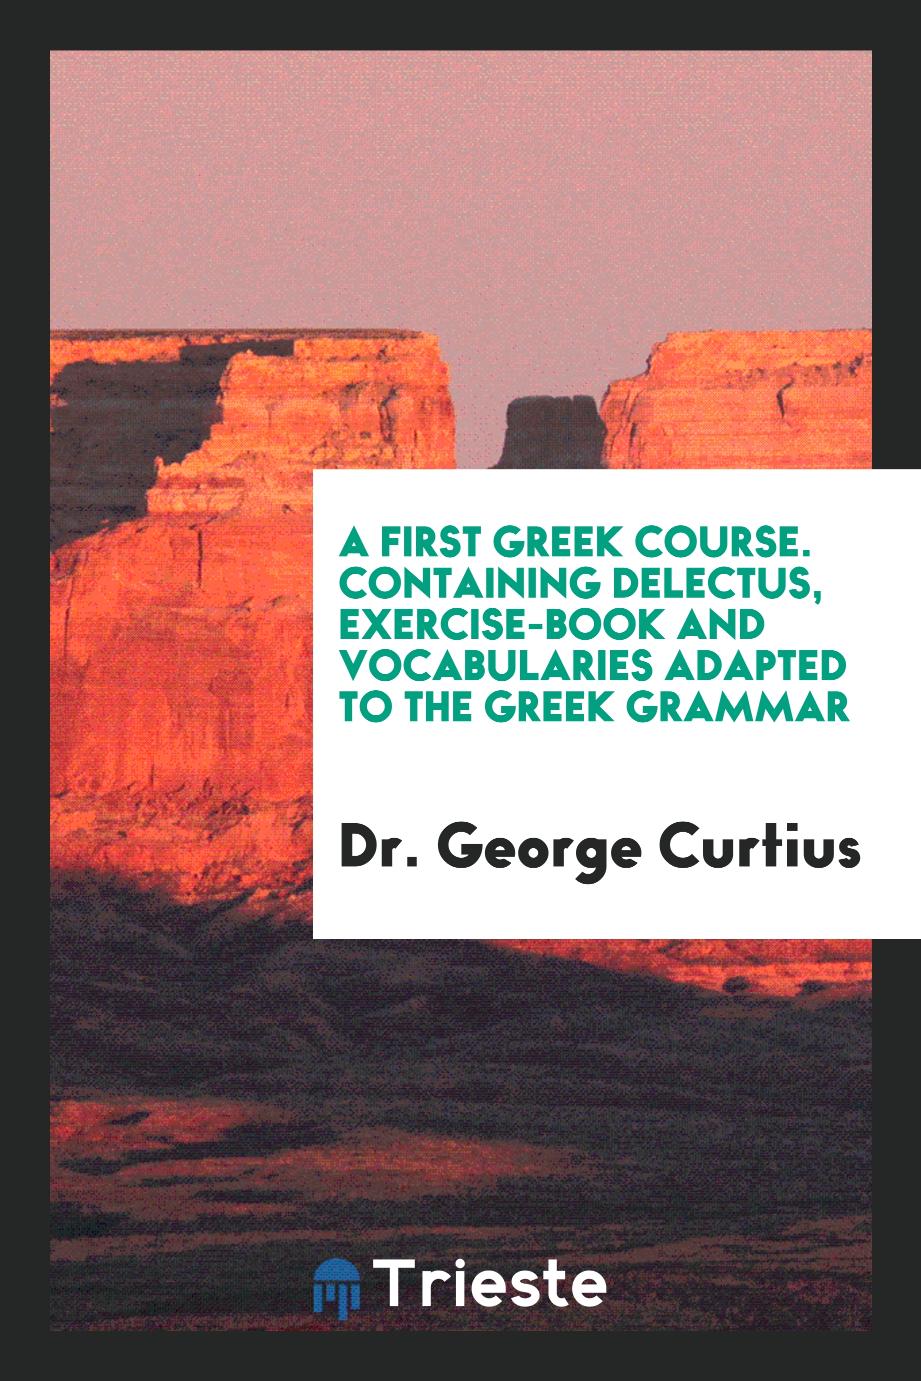 A First Greek Course. Containing Delectus, Exercise-Book and Vocabularies Adapted to the Greek Grammar